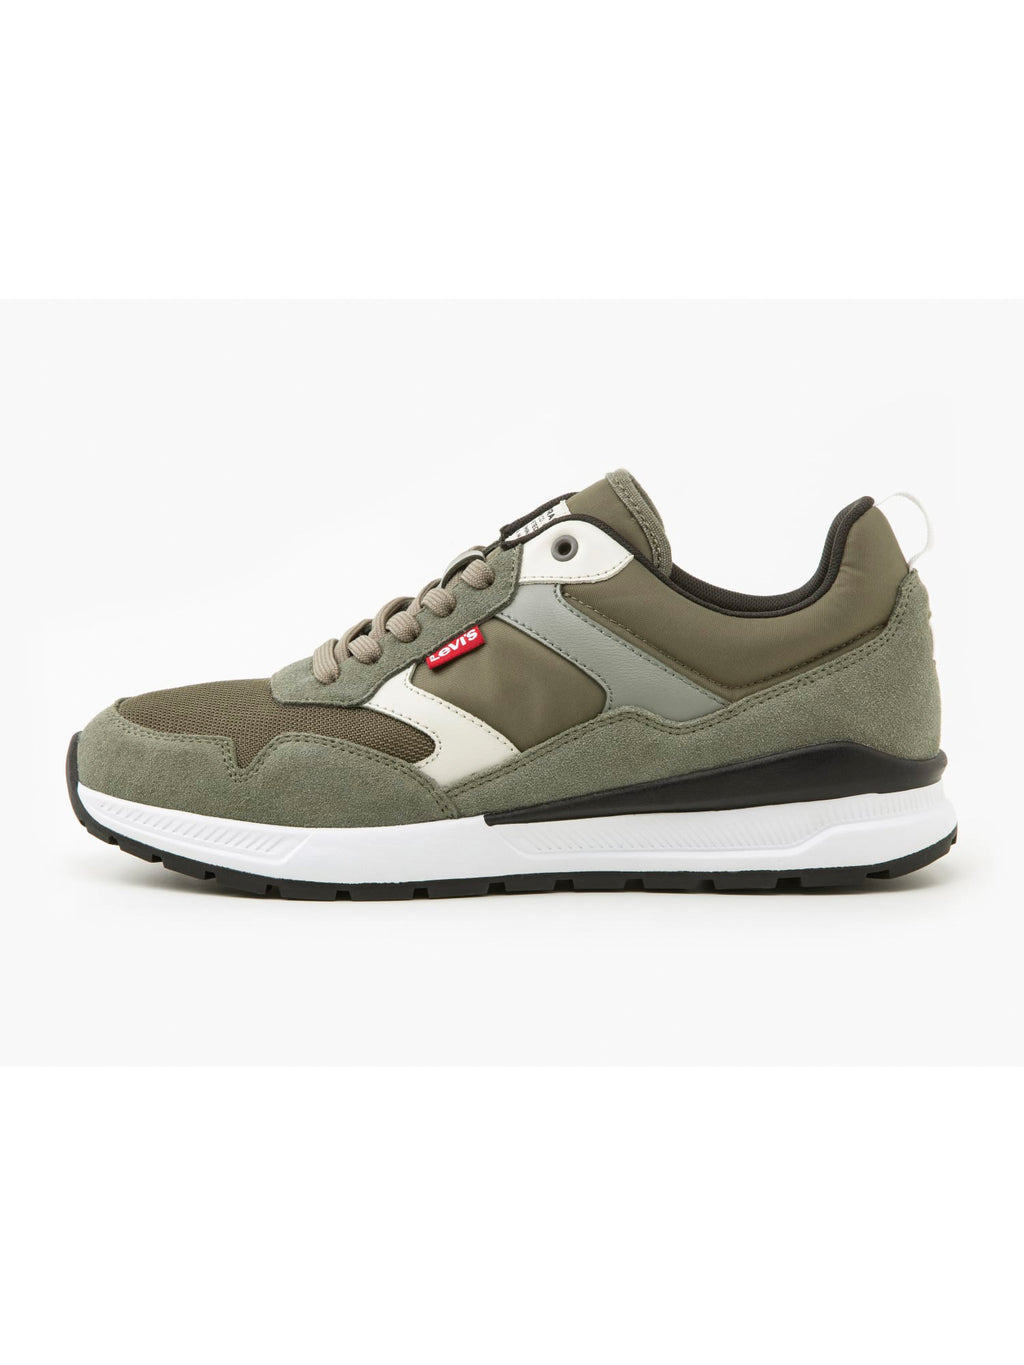 levis-trainers-oats-green-234233-37